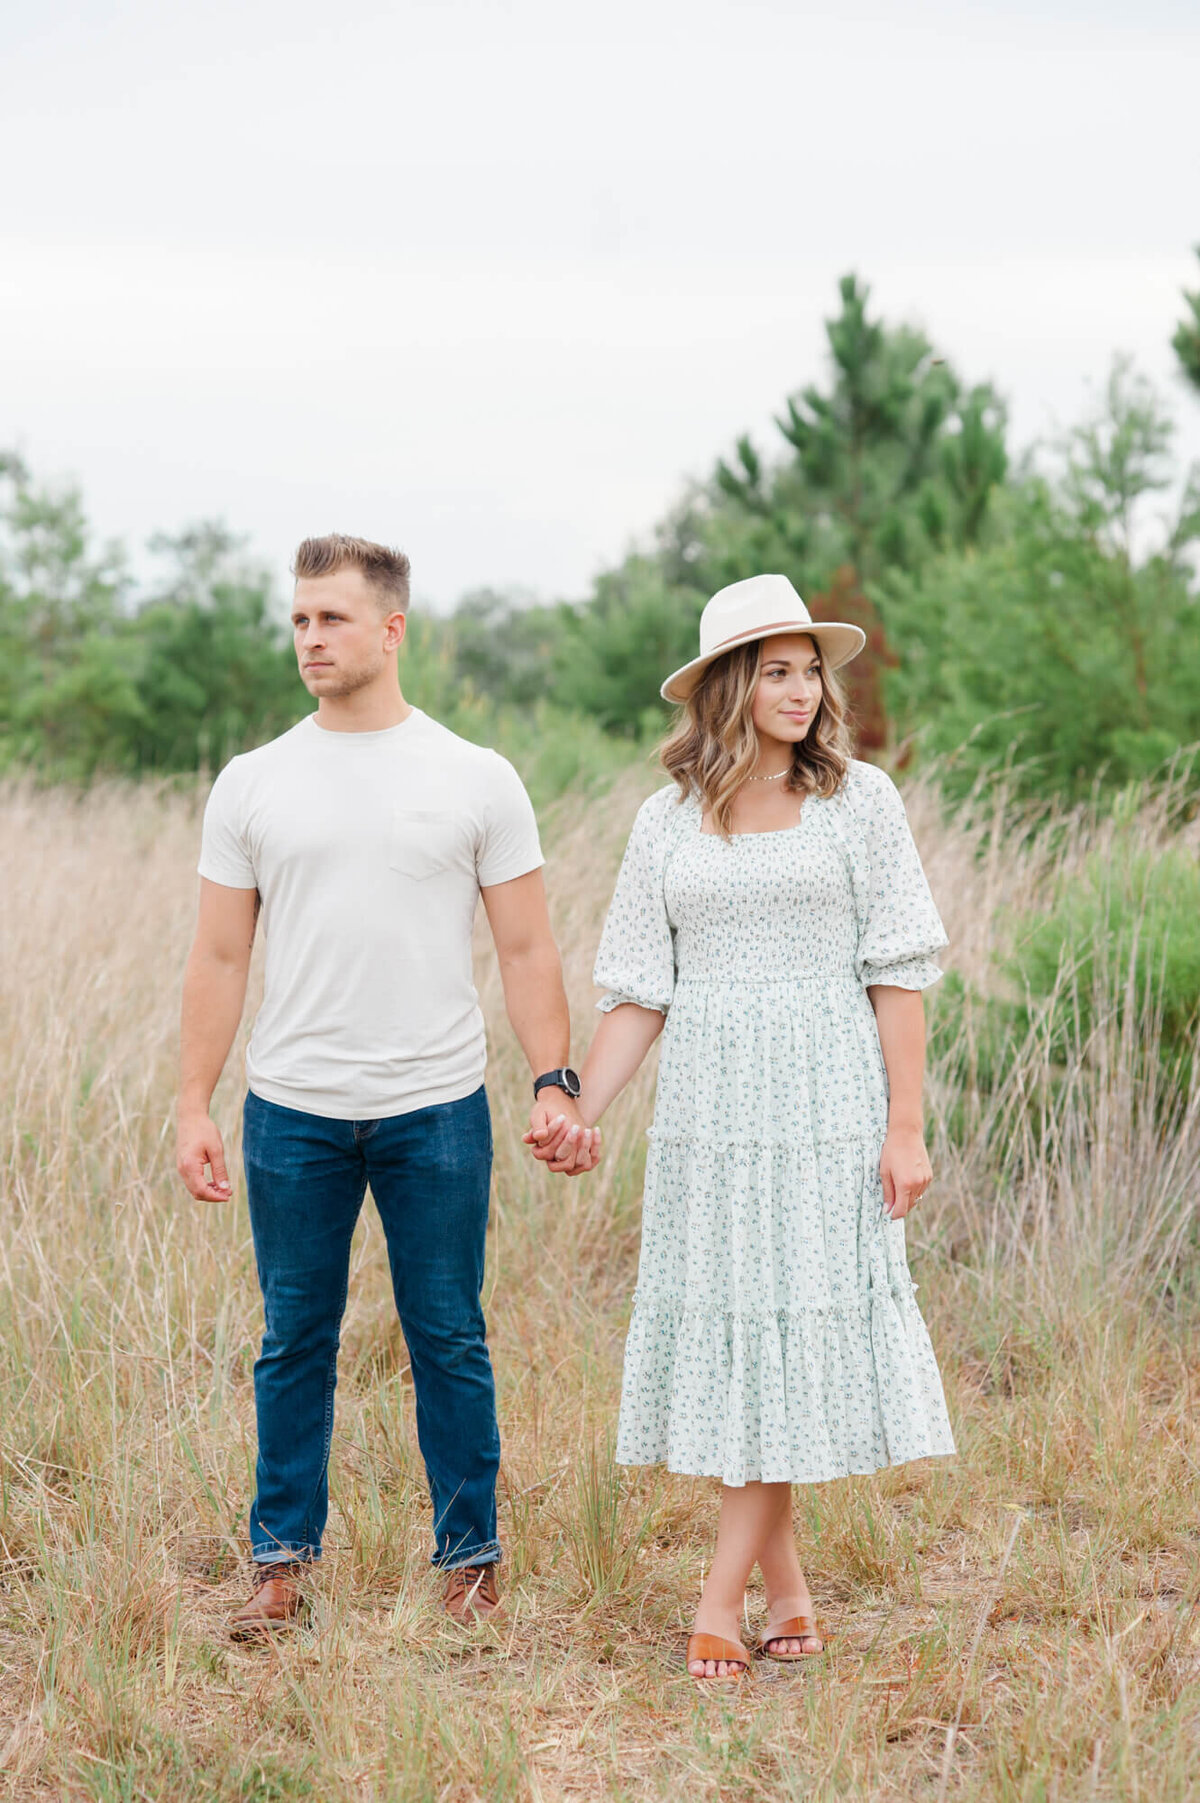 Parents dressed stylishly standing in a field holding hands looking in the opposite direction